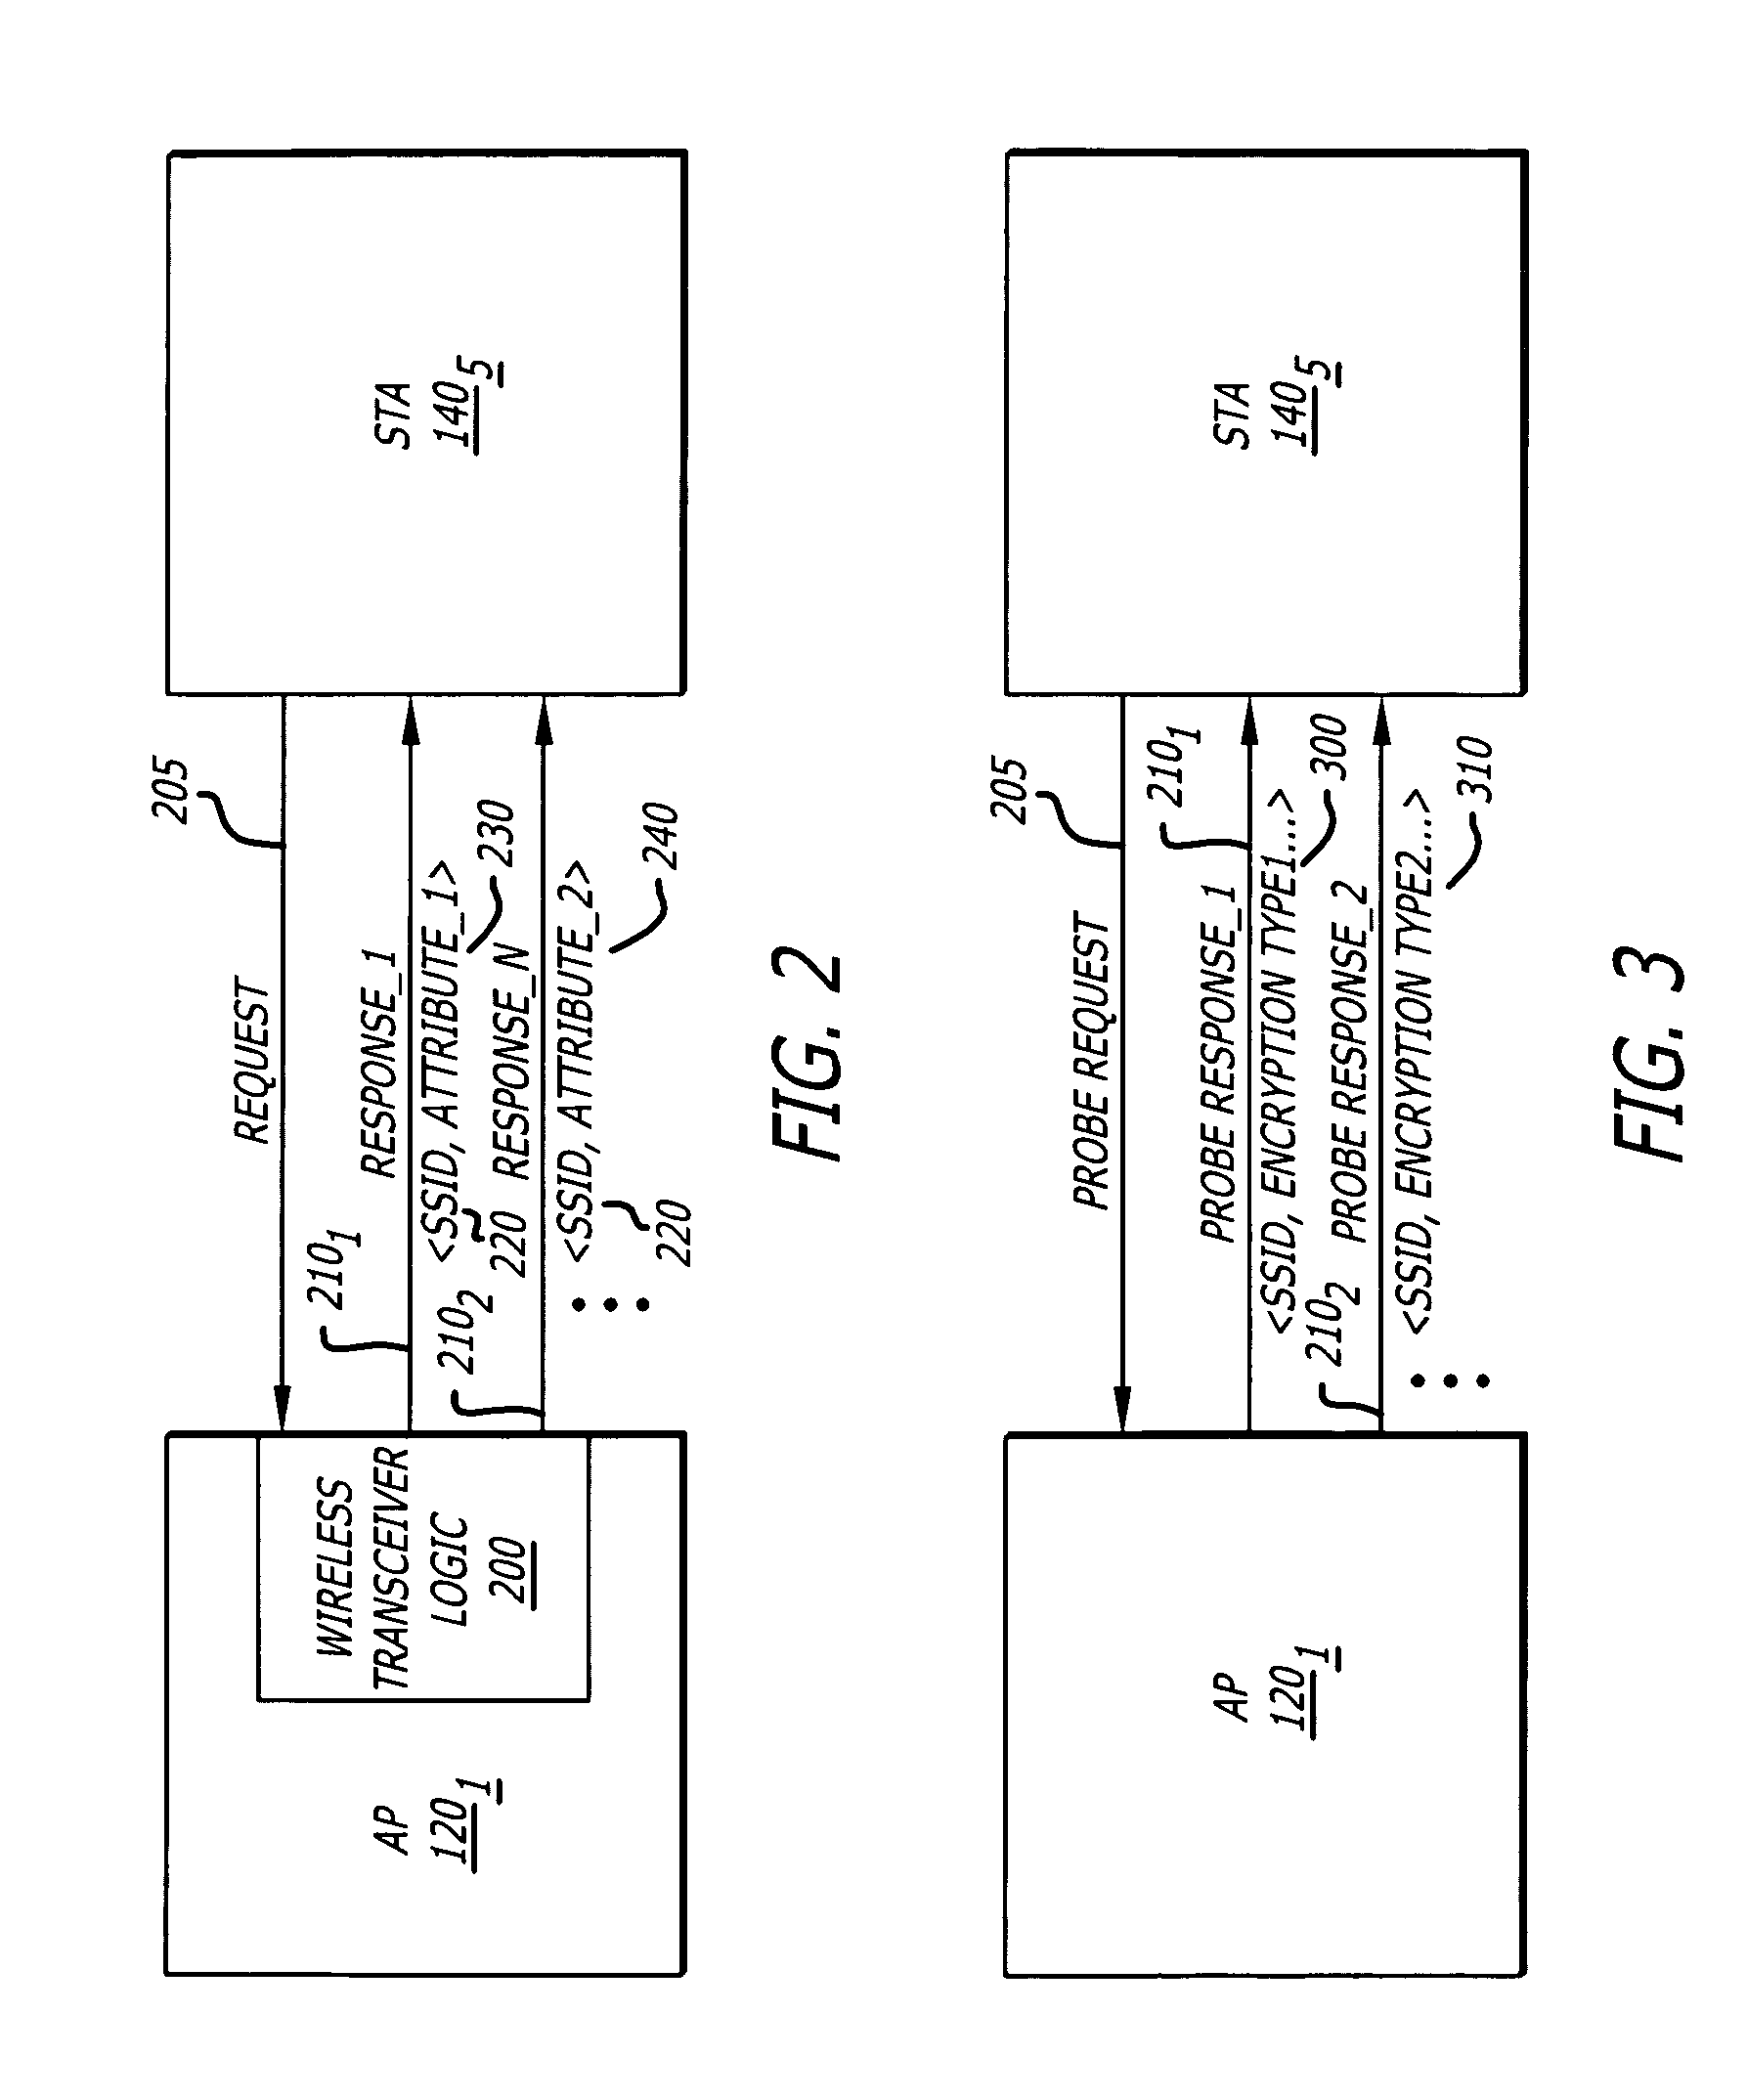 System and method for advertising the same service set identifier for different basic service sets